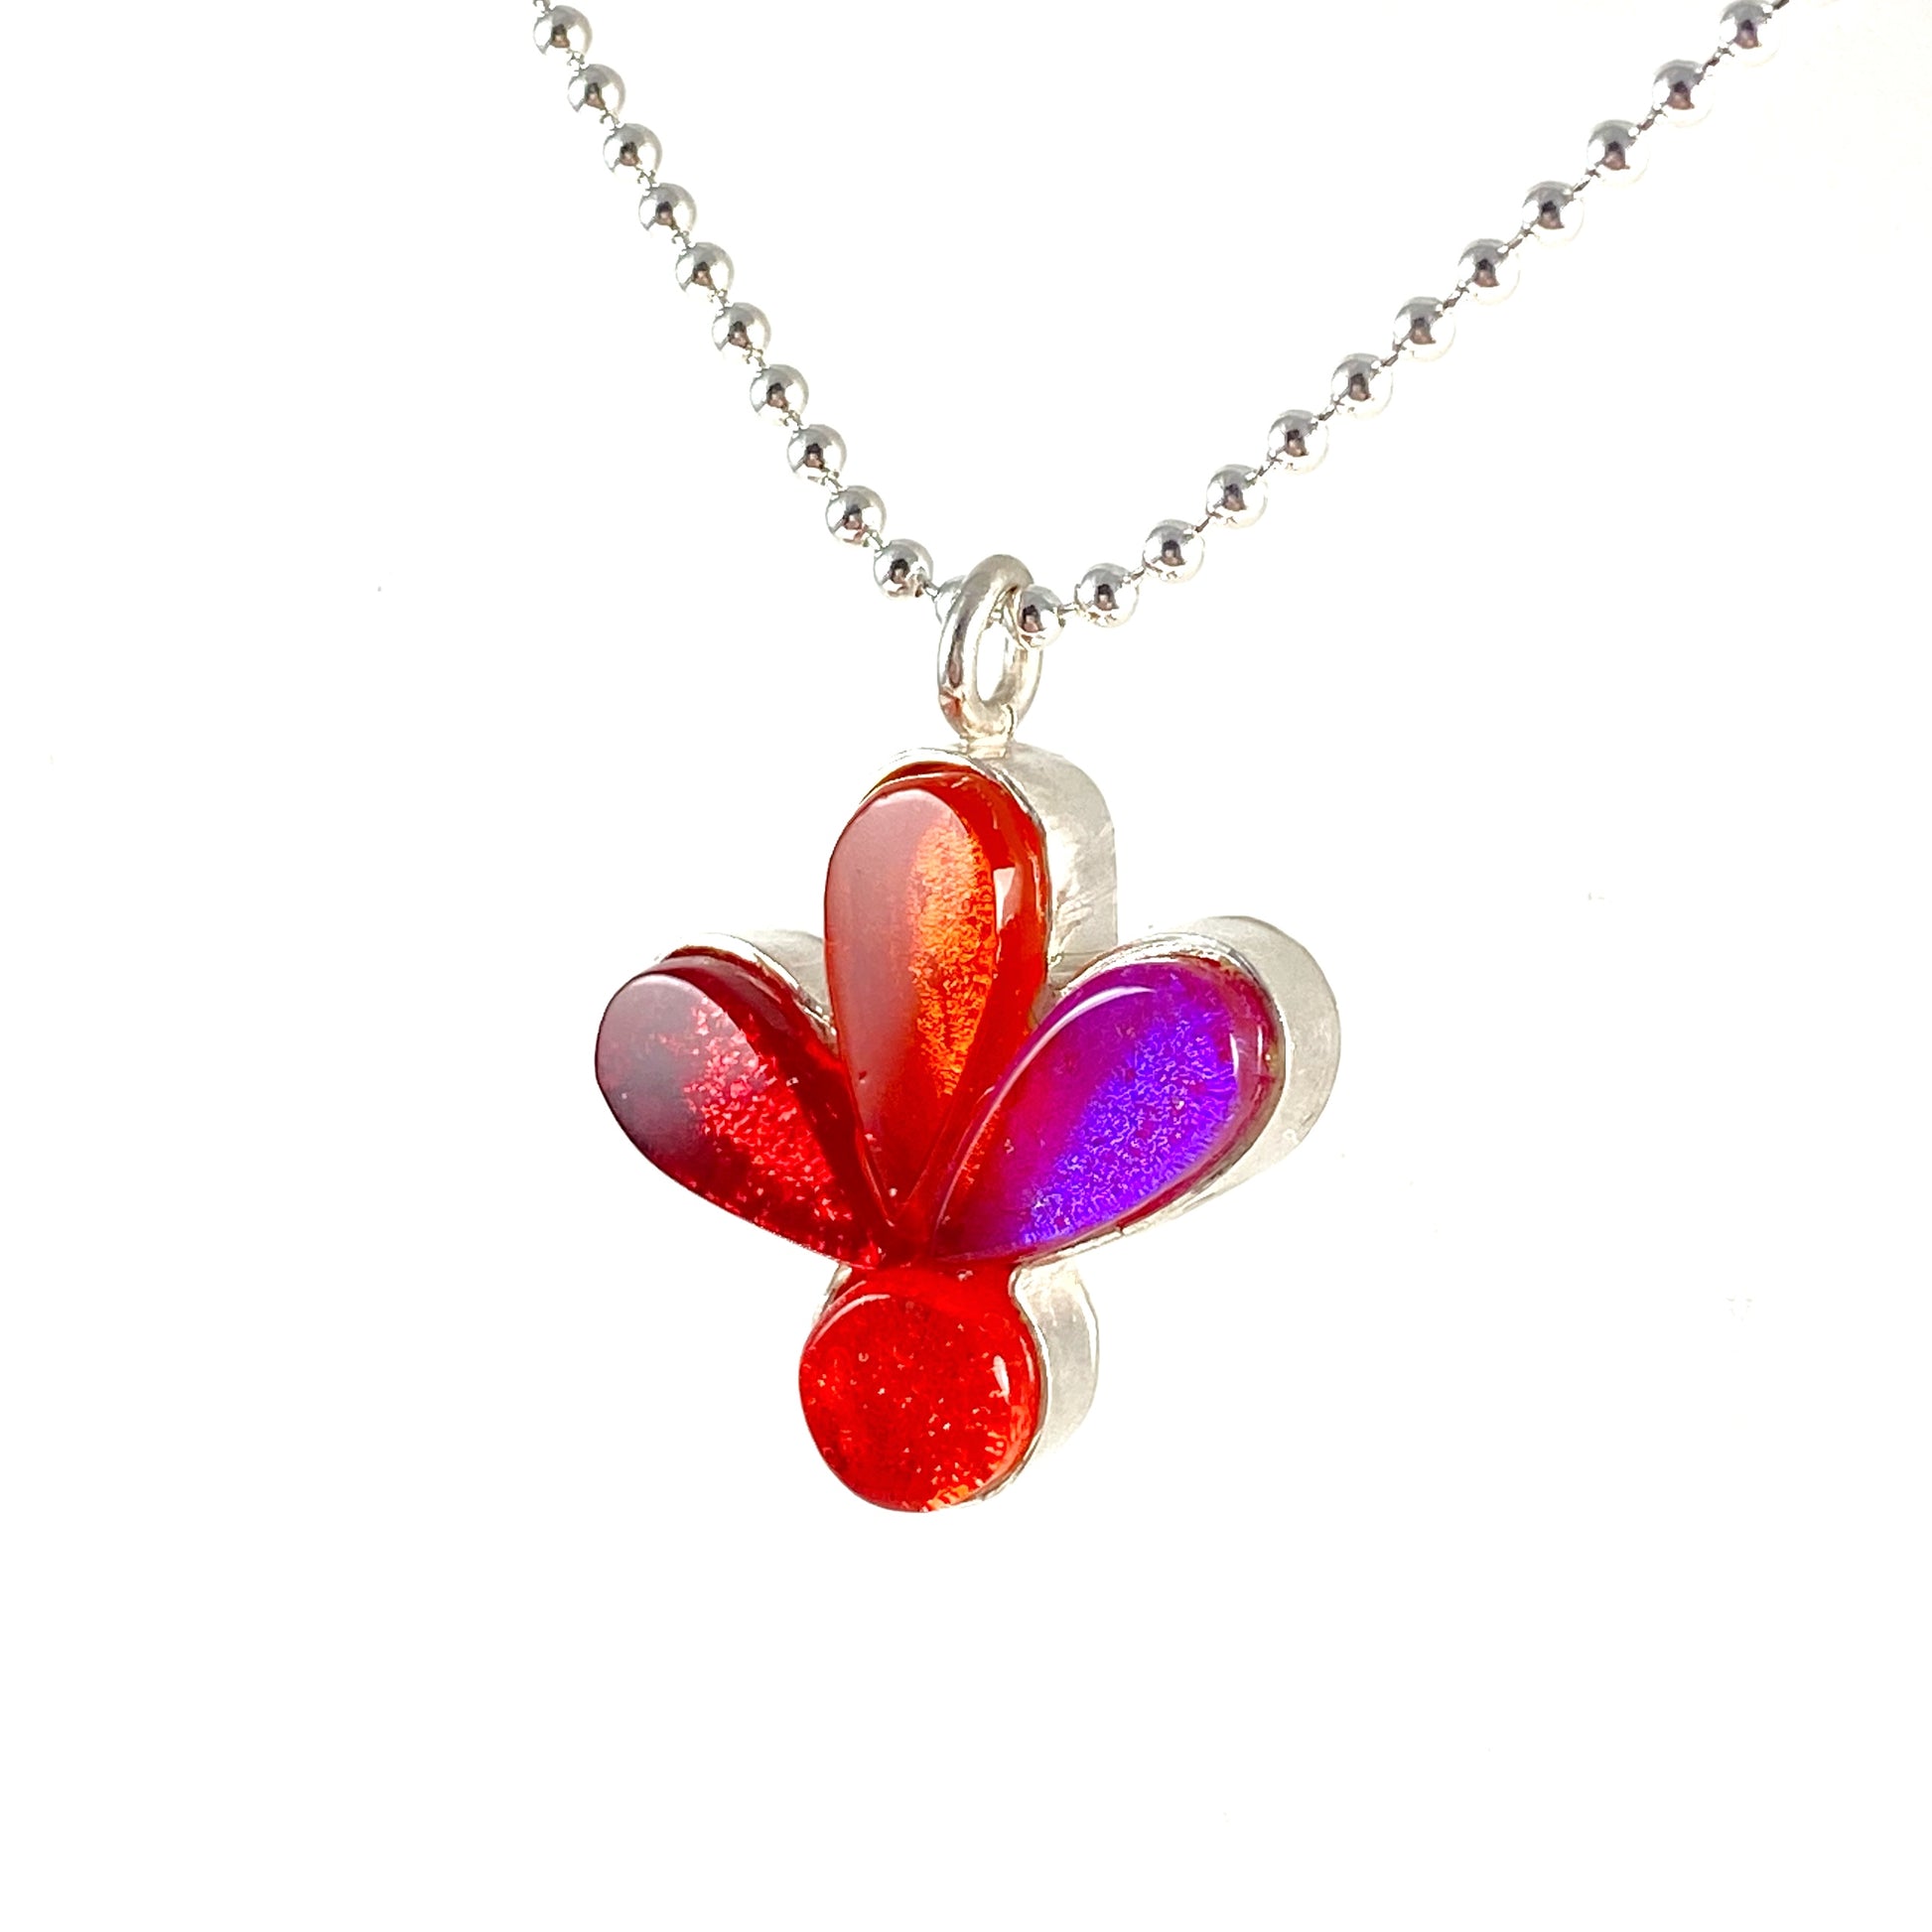 blossom flower necklace, pendant, red, orange, pink, fused glass, glass jewelry, glass and silver jewelry, handmade, handcrafted, American Craft, hand fabricated jewelry, hand fabricated jewellery, Athen, Georgia, colorful jewelry, sparkle, bullseye glass, dichroic glass, art jewelry